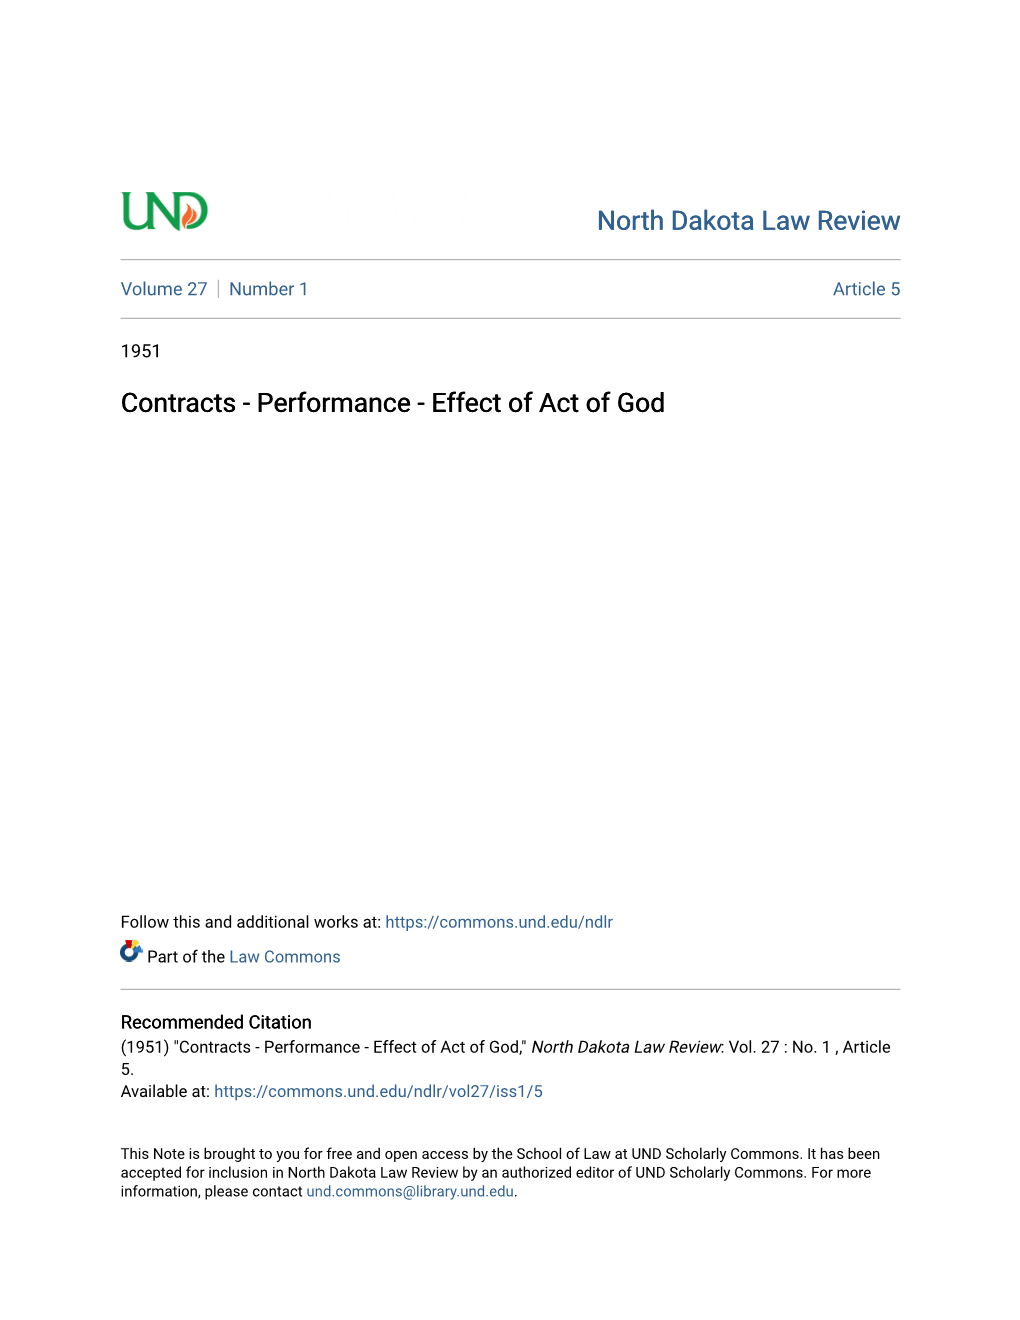 Contracts - Performance - Effect of Act of God